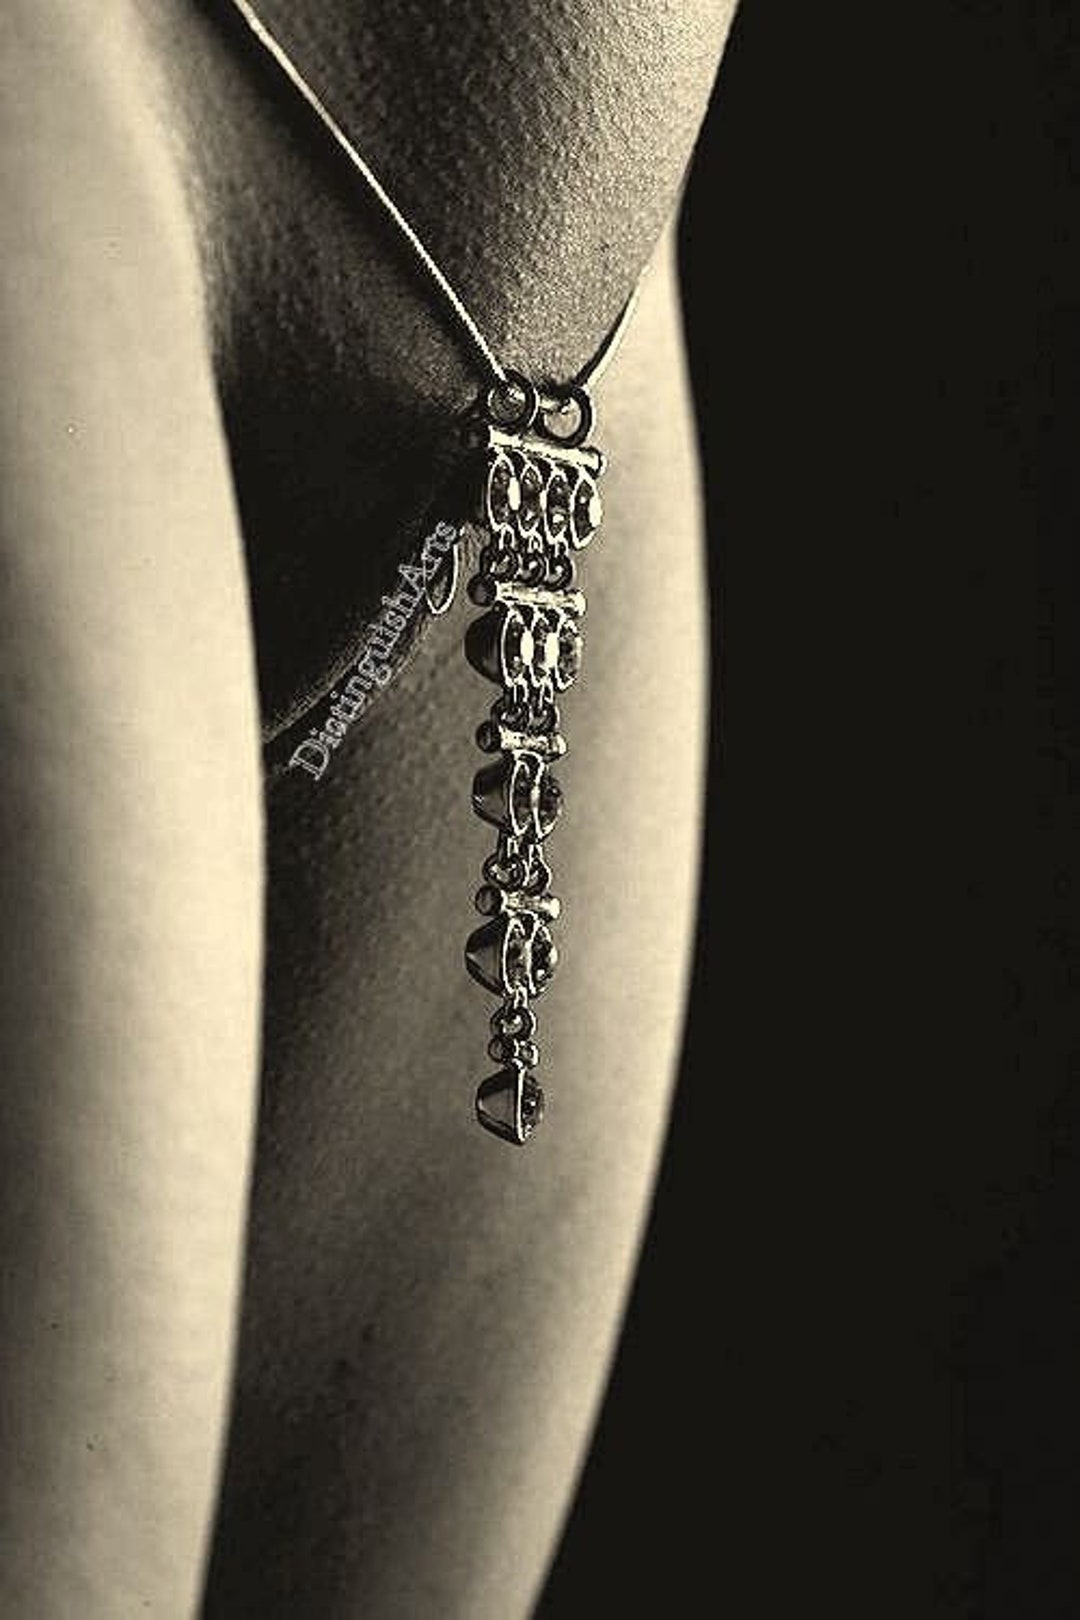 Intimate Chain Jewelrybelly Chain Vagina Jewelryvch picture